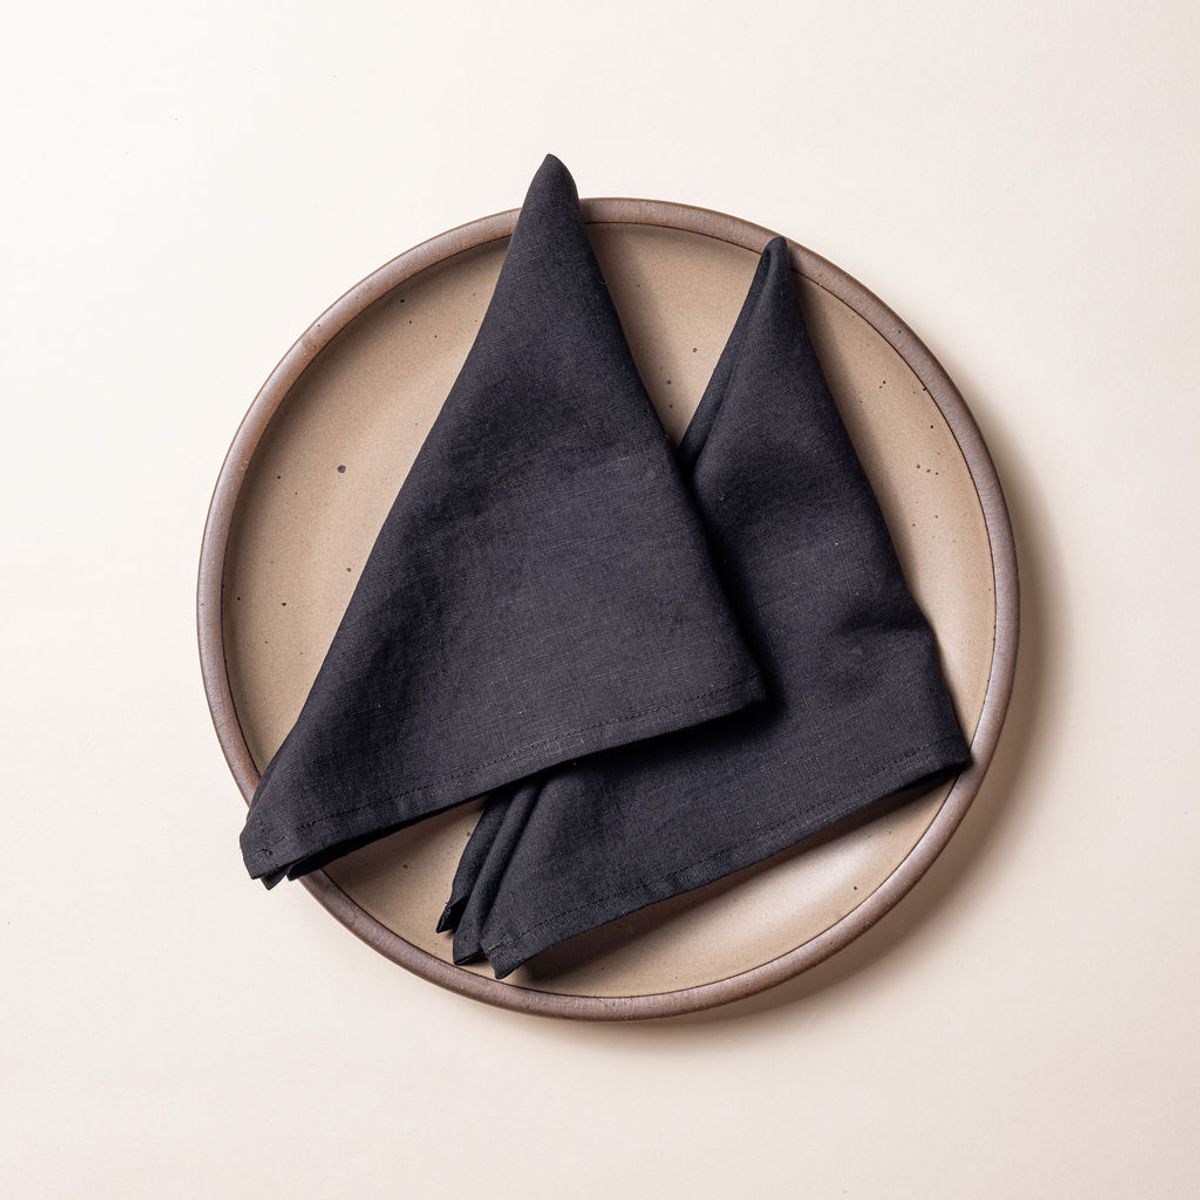 Two charcoal linen napkins folded into triangles on a warm brown ceramic plate.